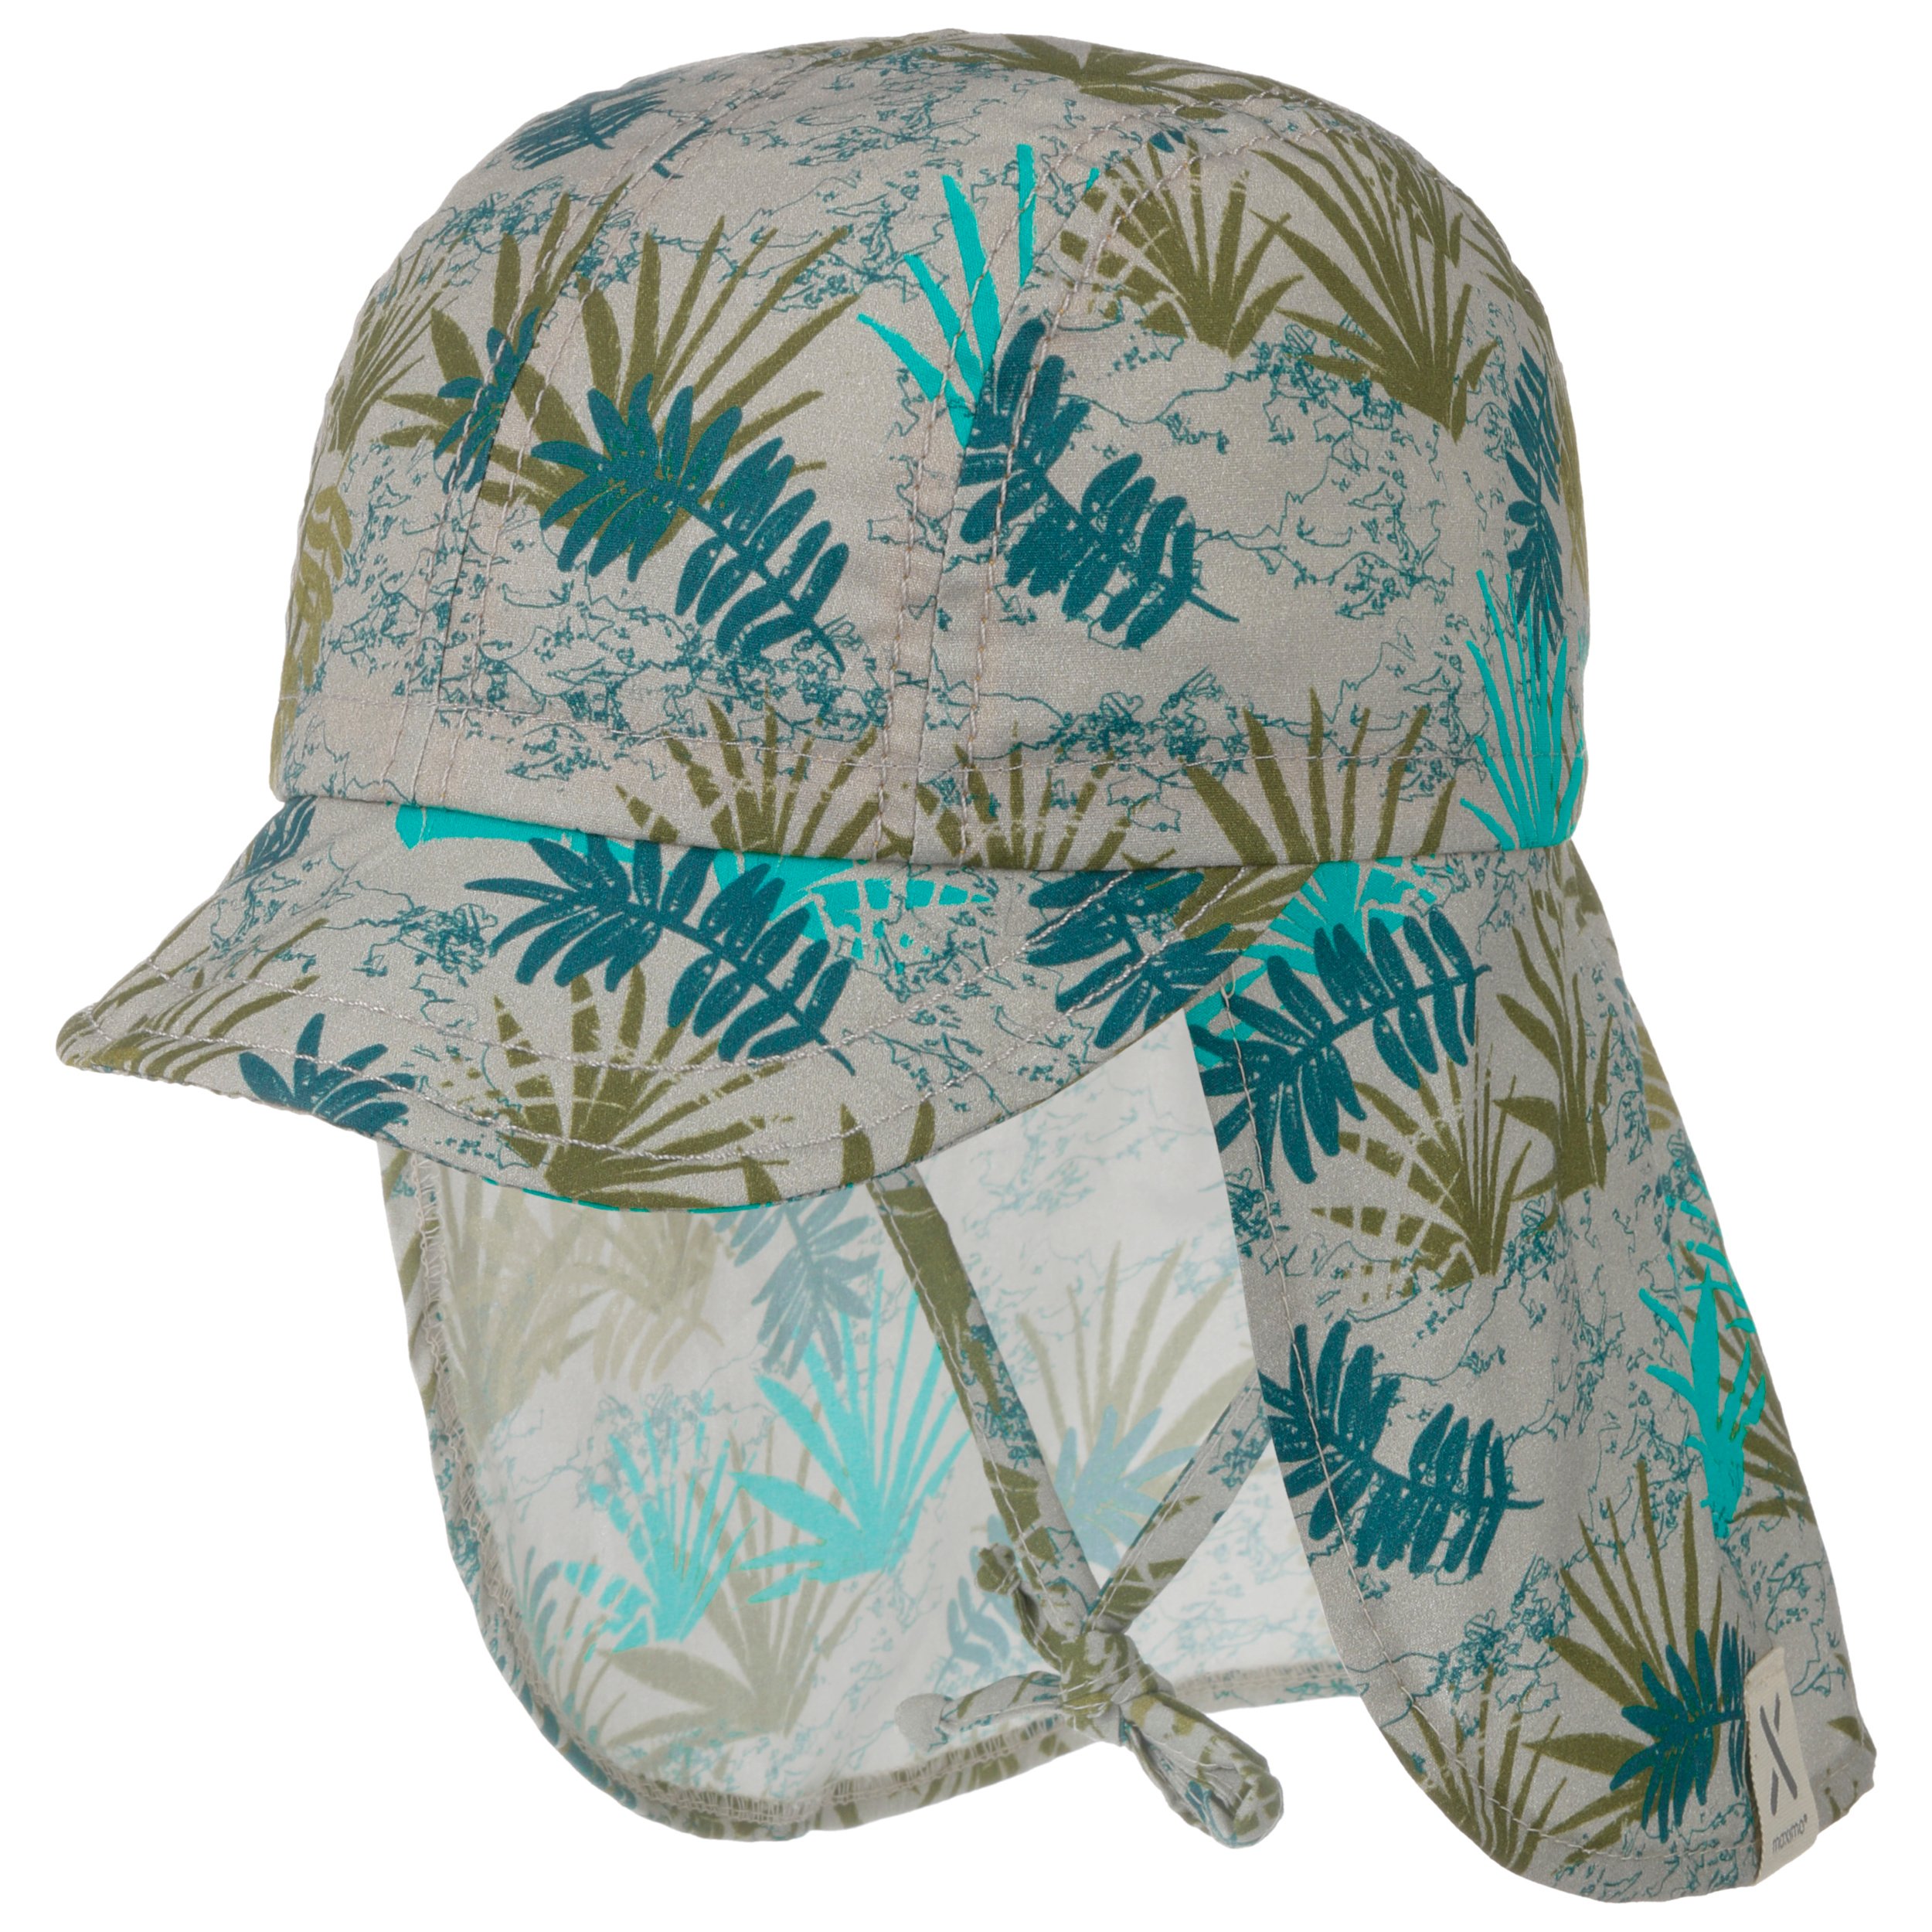 Casquette pour Enfant Palm Leaves by maximo - 22,95 CHF